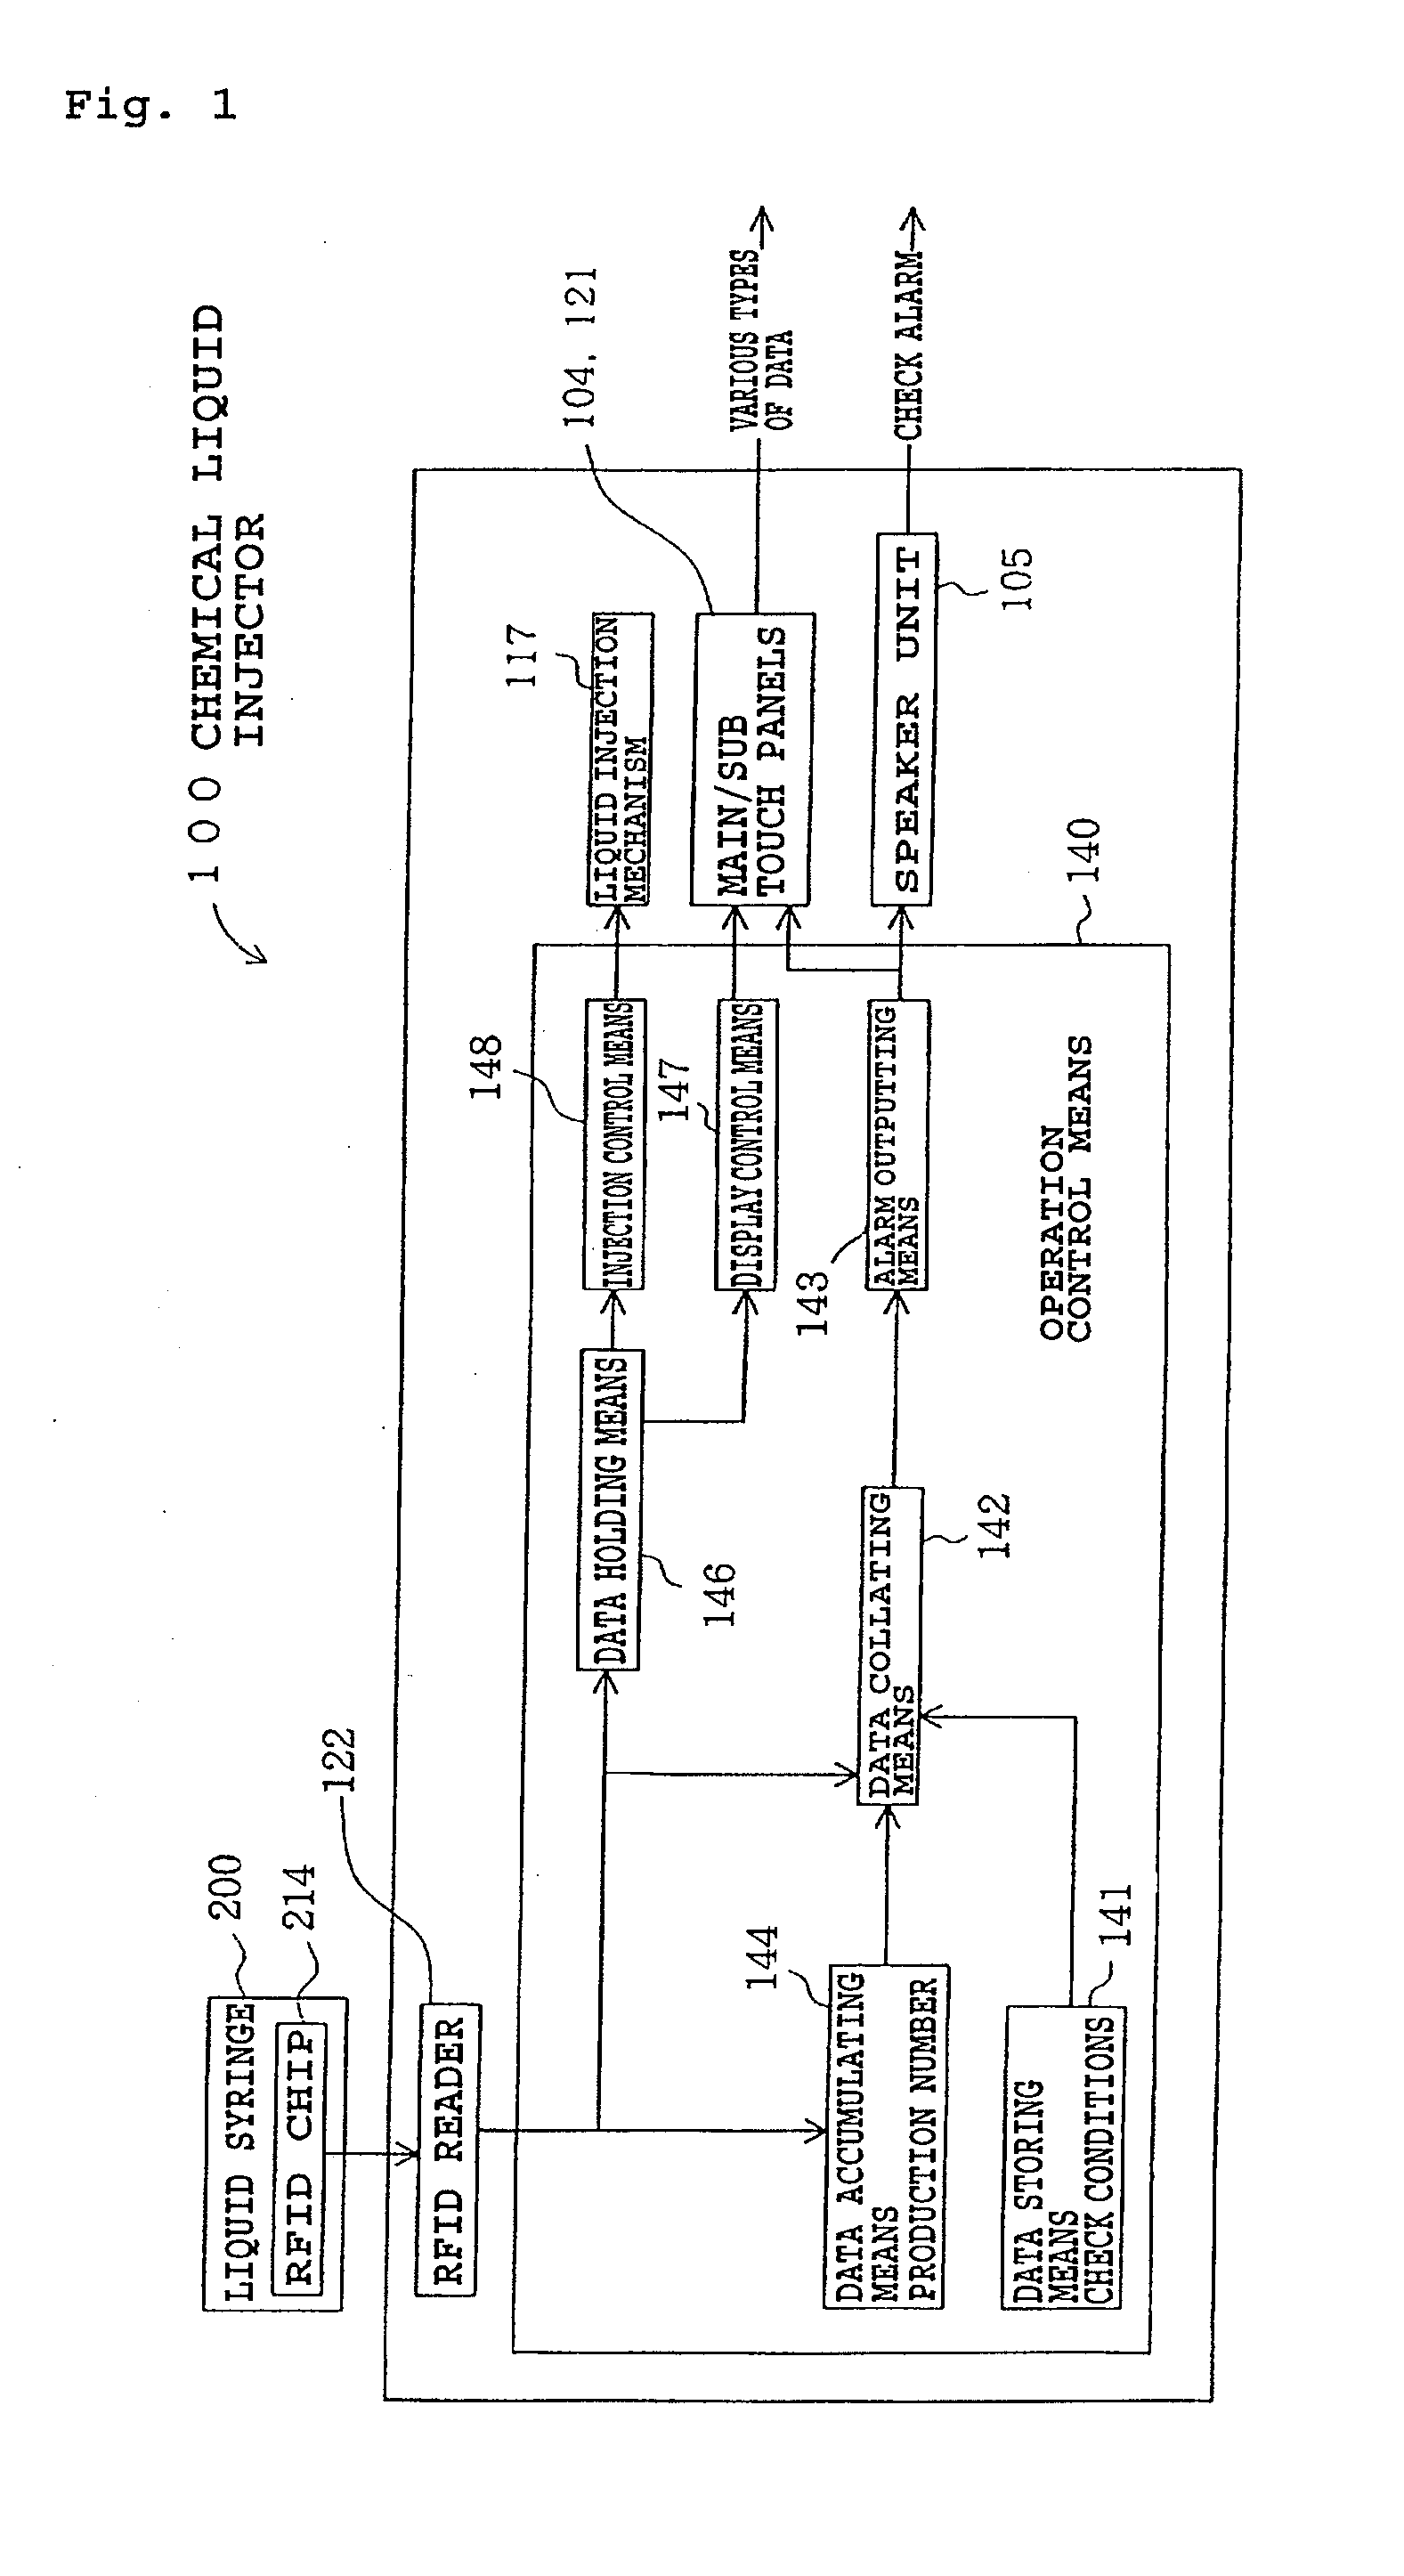 Chemical liquid injection system